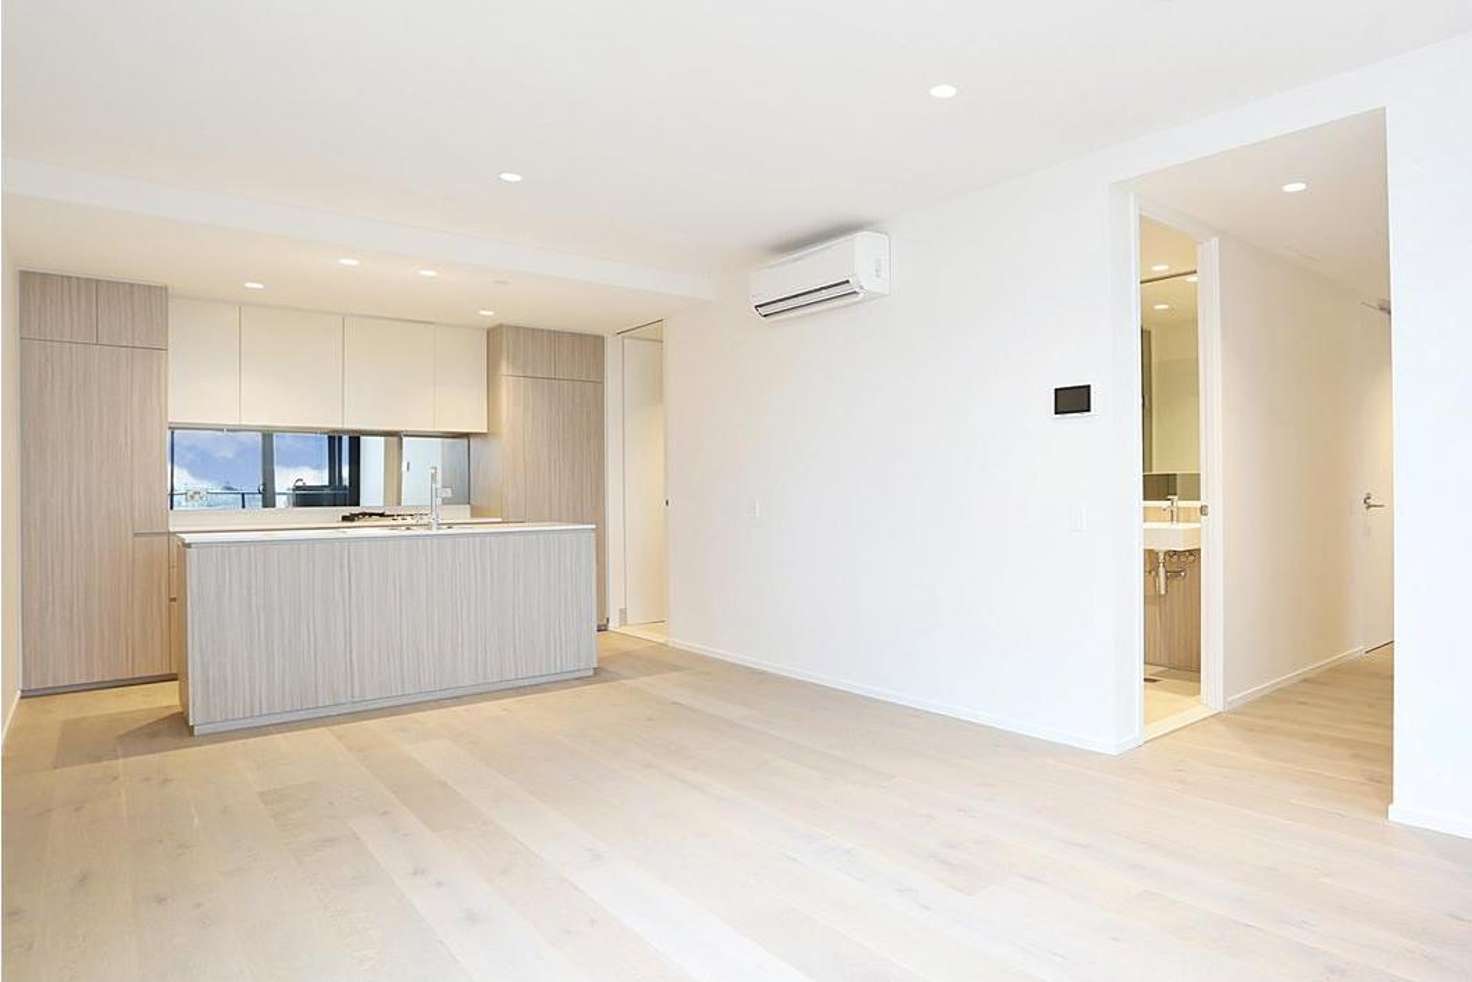 Main view of Homely apartment listing, 705/8C Evergreen Mews, Armadale VIC 3143